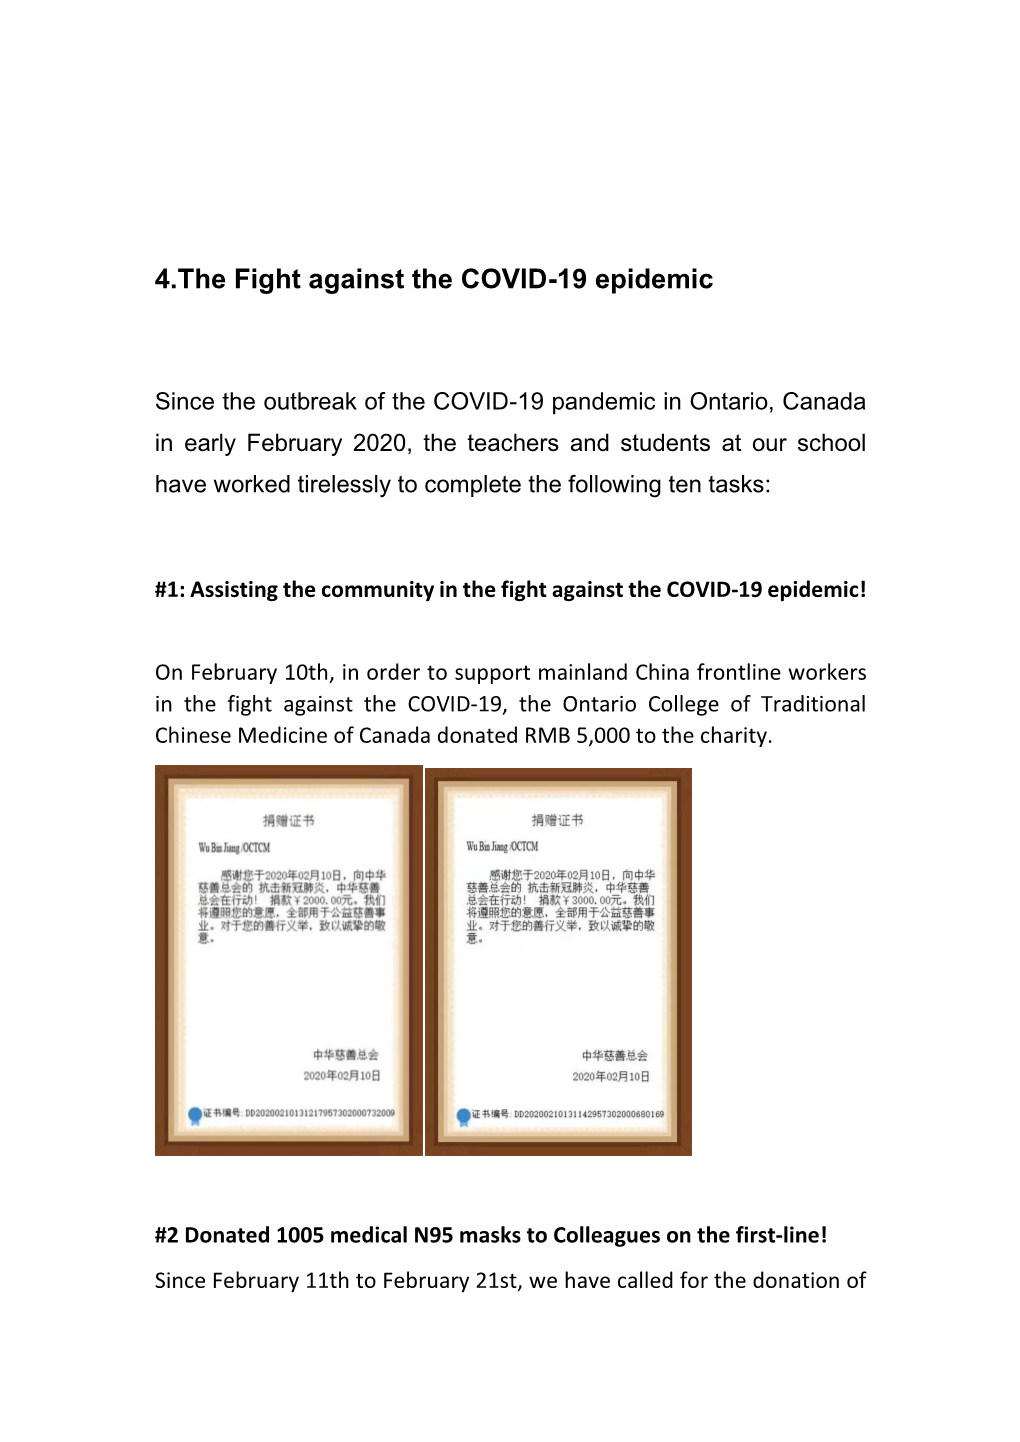 4.The Fight Against the COVID-19 Epidemic